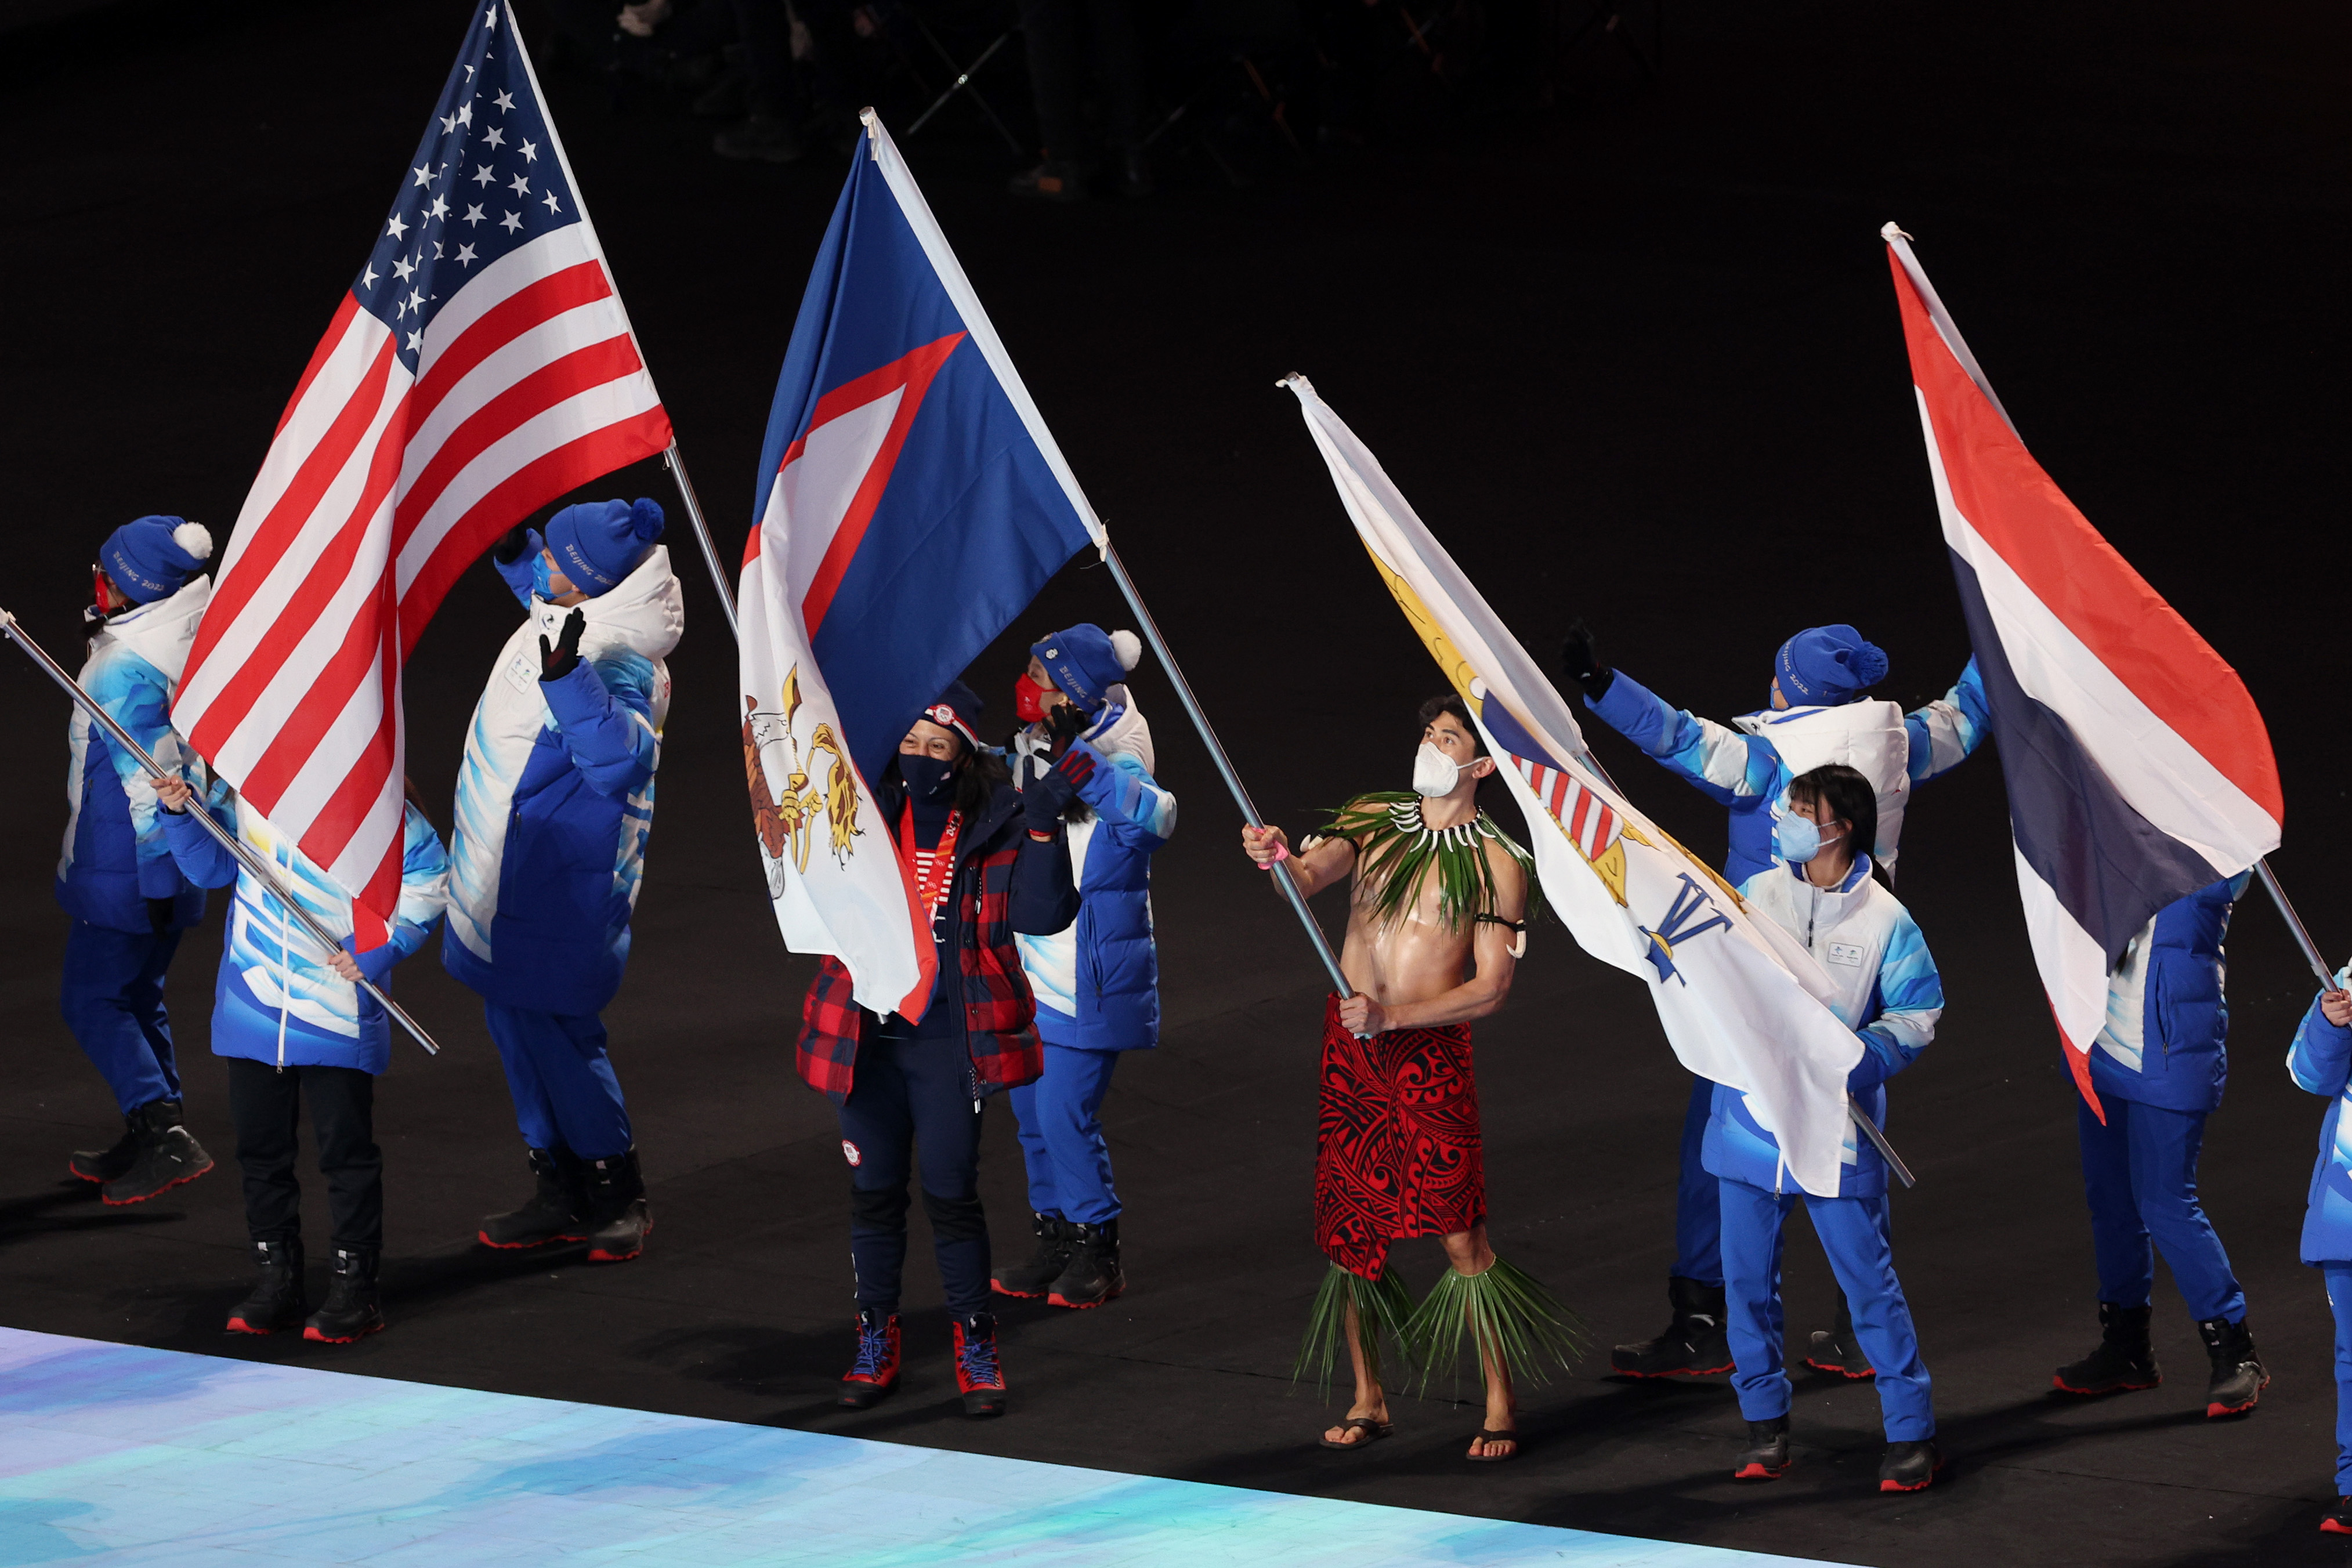 Nathan Crumpton of Team American Samoa waves the flag during the Winter Olympic Closing Ceremony.